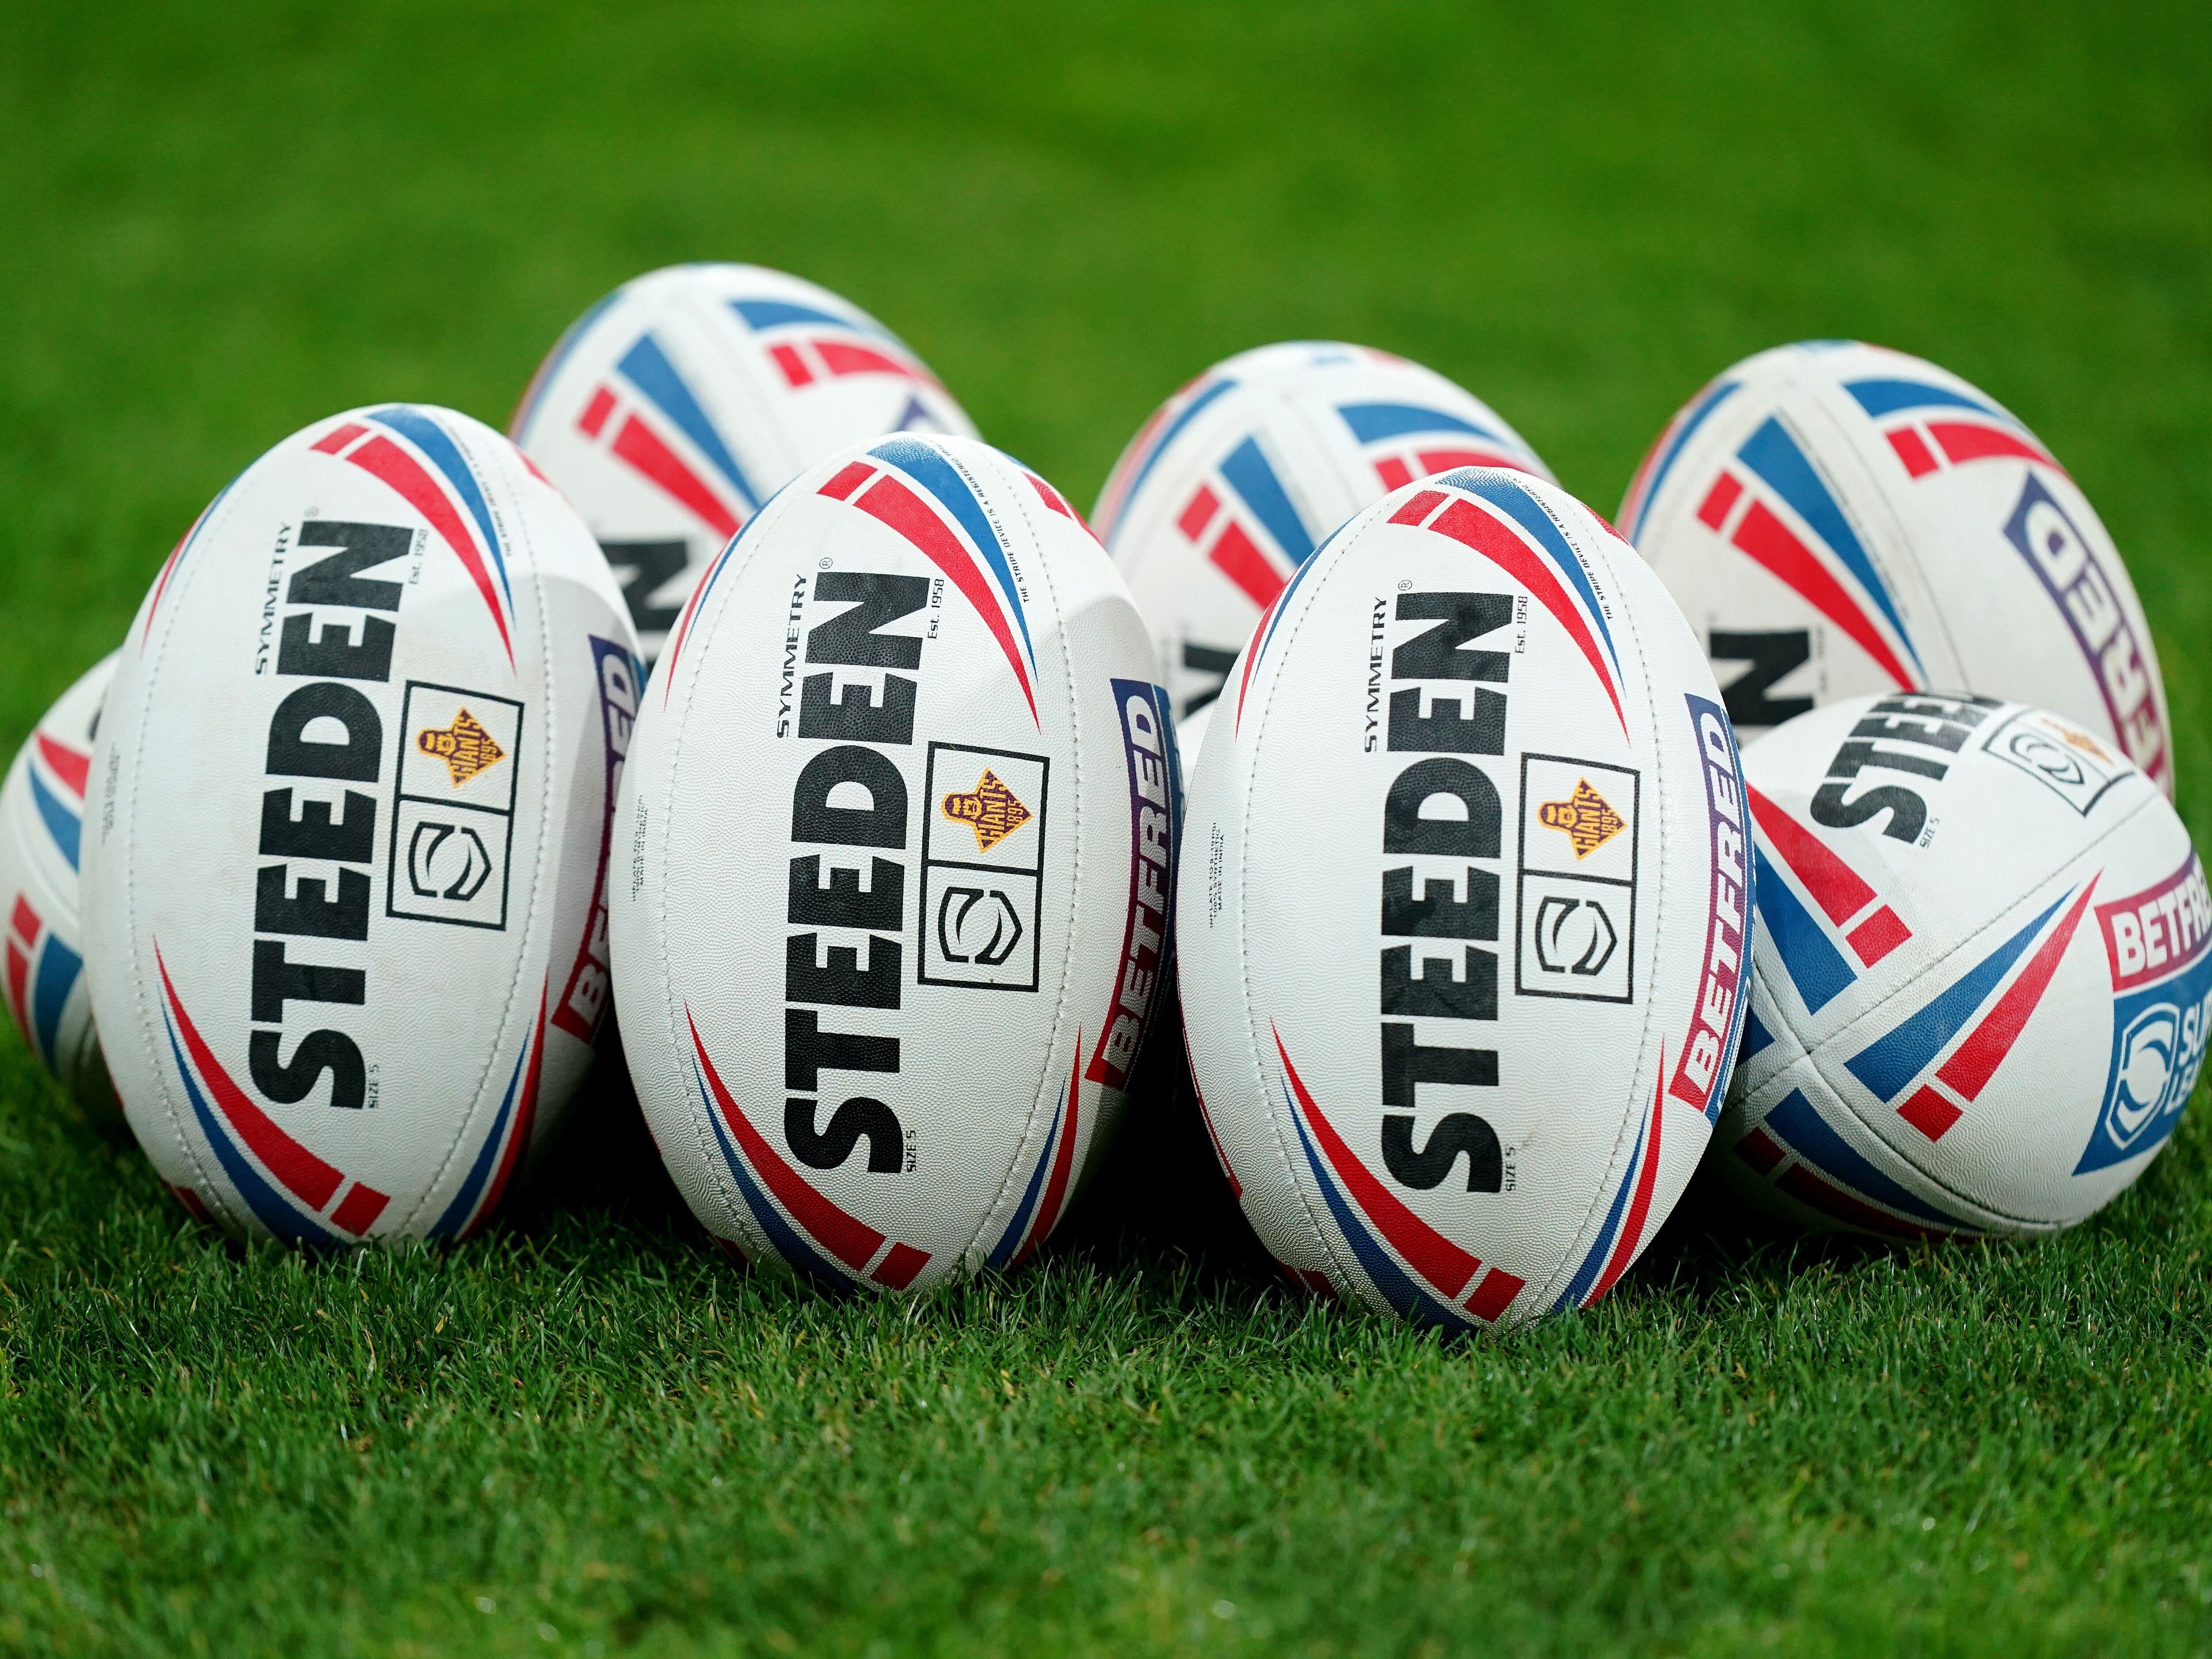 Q&A: What does the shake-up of domestic rugby league mean for the sport?